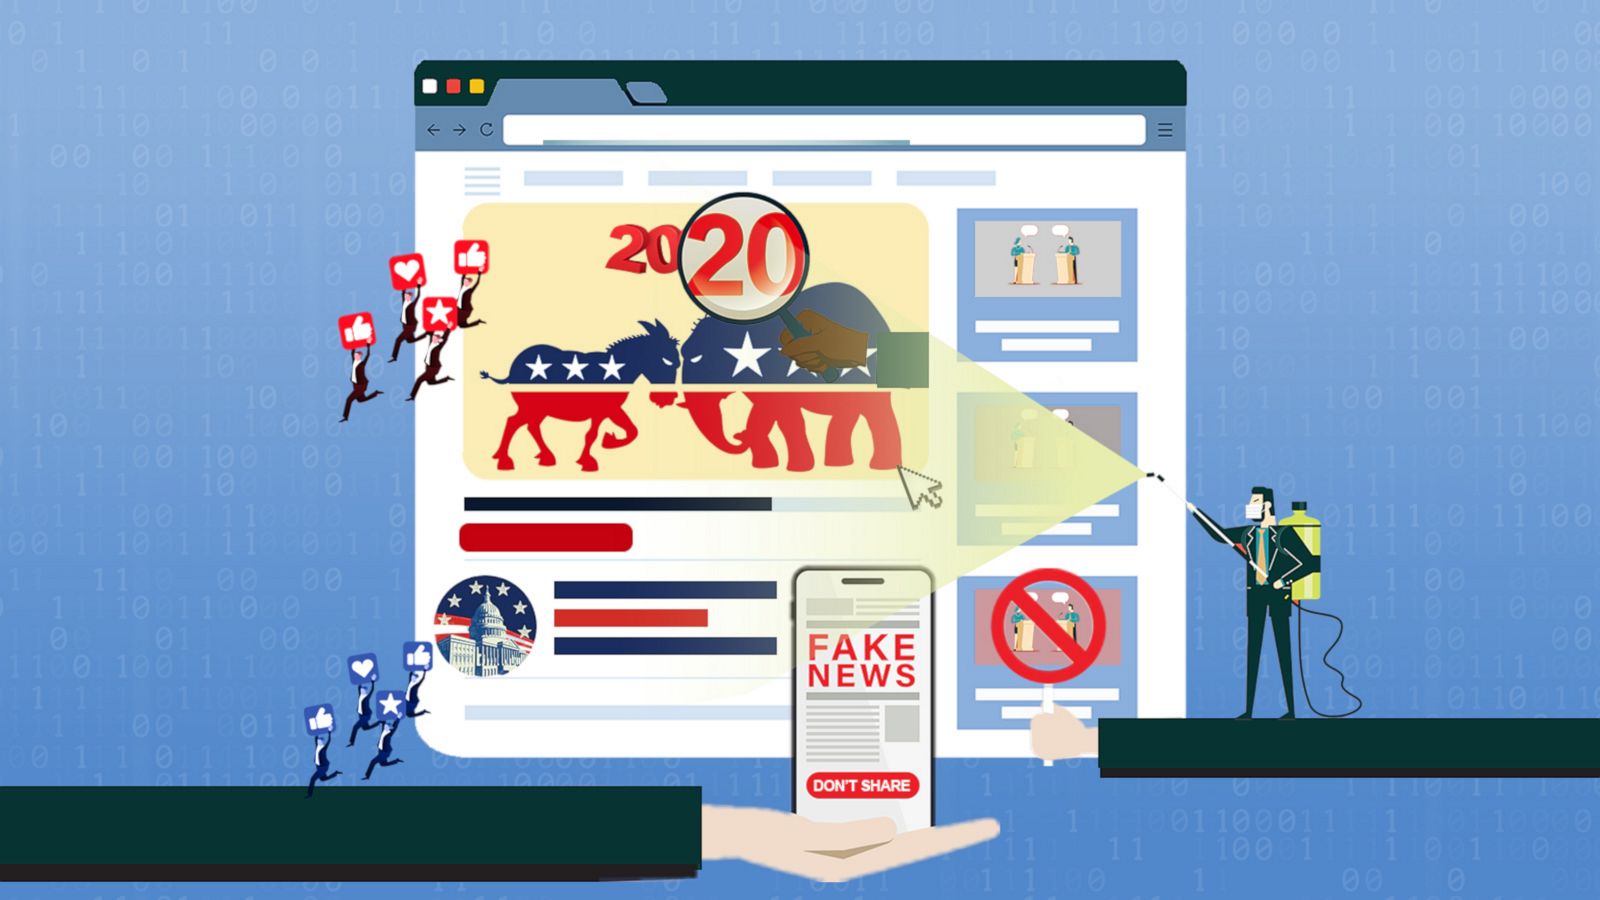 Political Ads During the 2020 Presidential Election Cycle Collected Personal Information and Spread Misleading Information